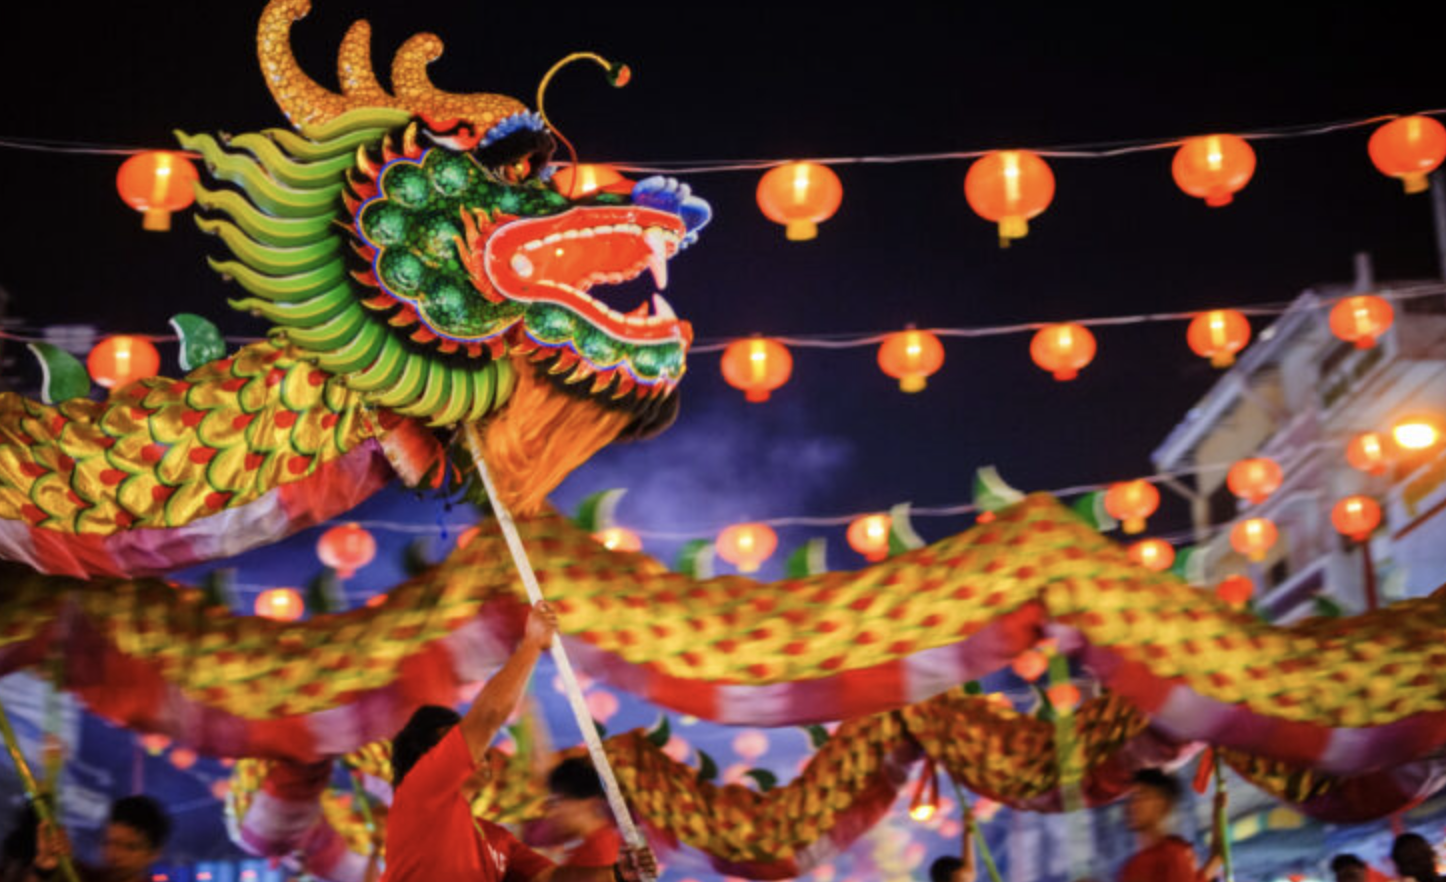 A dragon is lit up and carried around by dragon dancers in the night with red lanterns above the dragon's head in a Lunar New Year festival